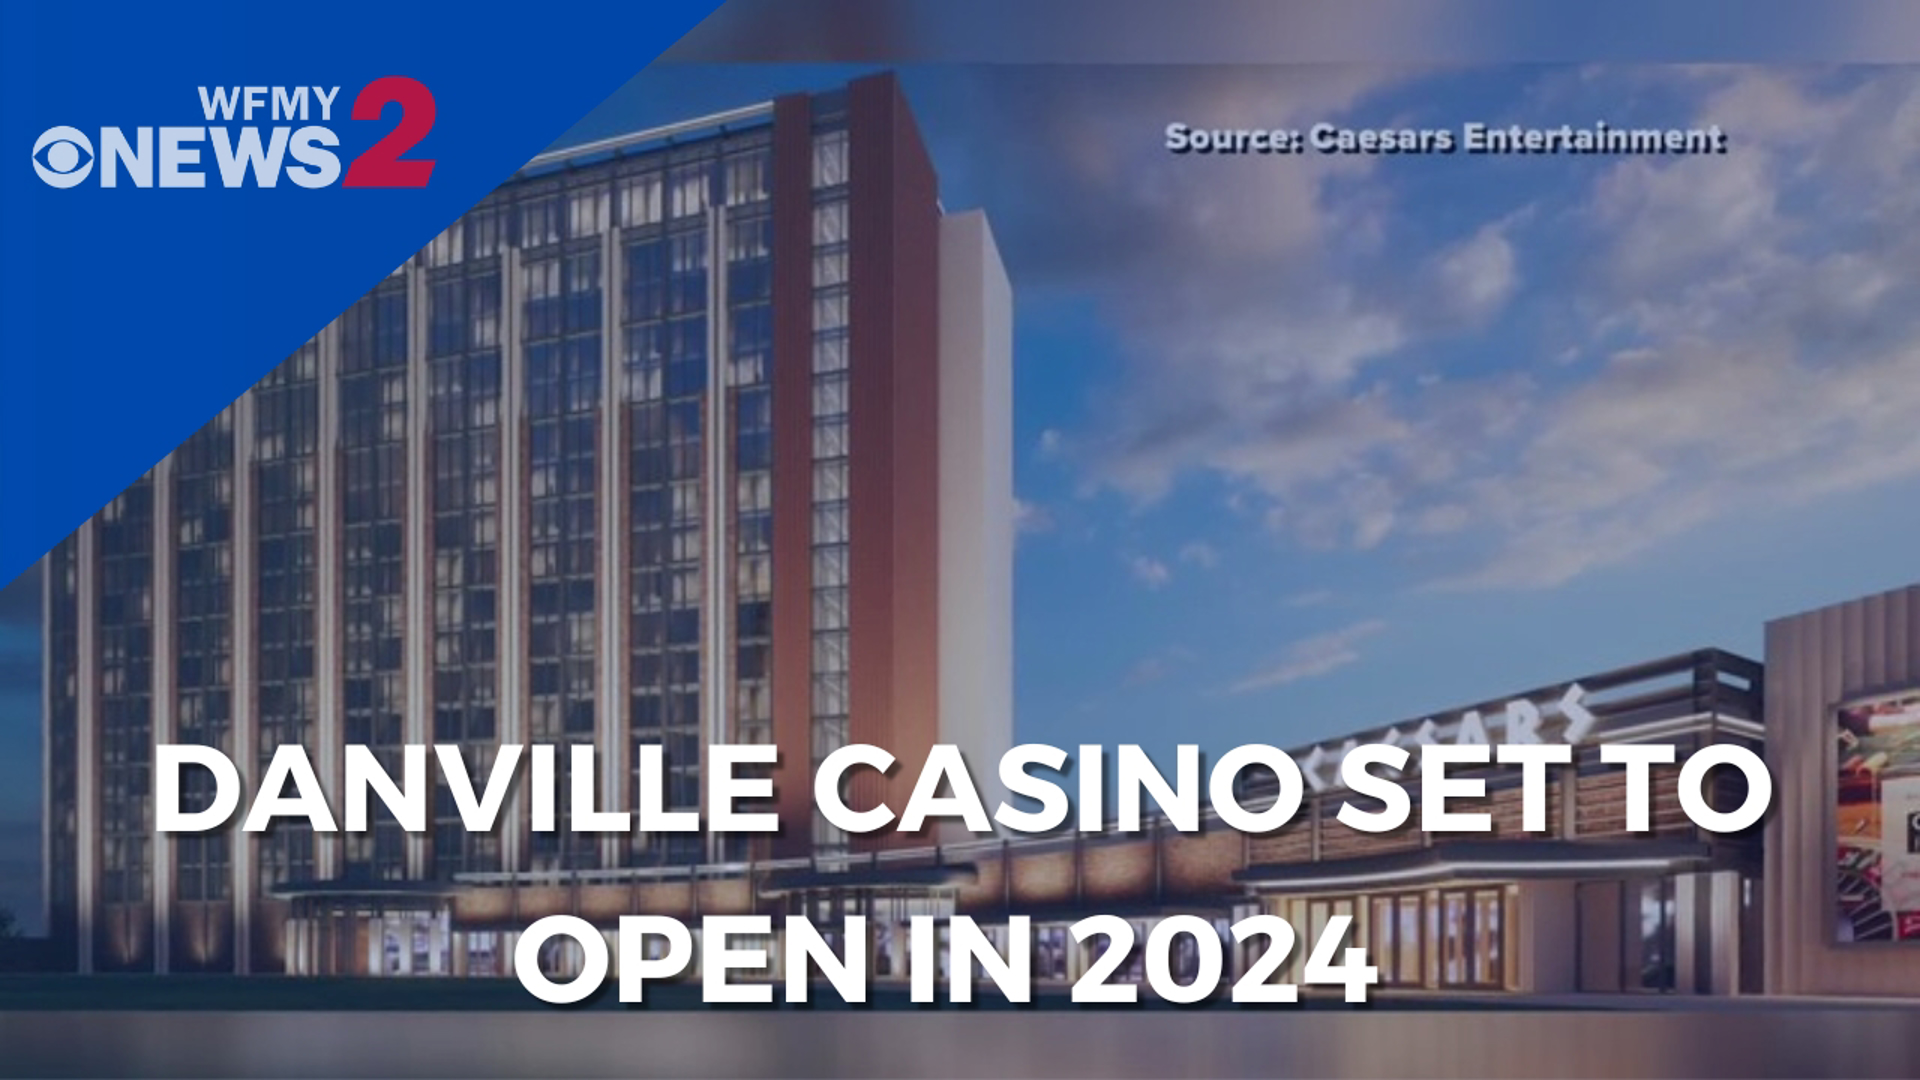 The casino is expected to be finished sometime in 2024.